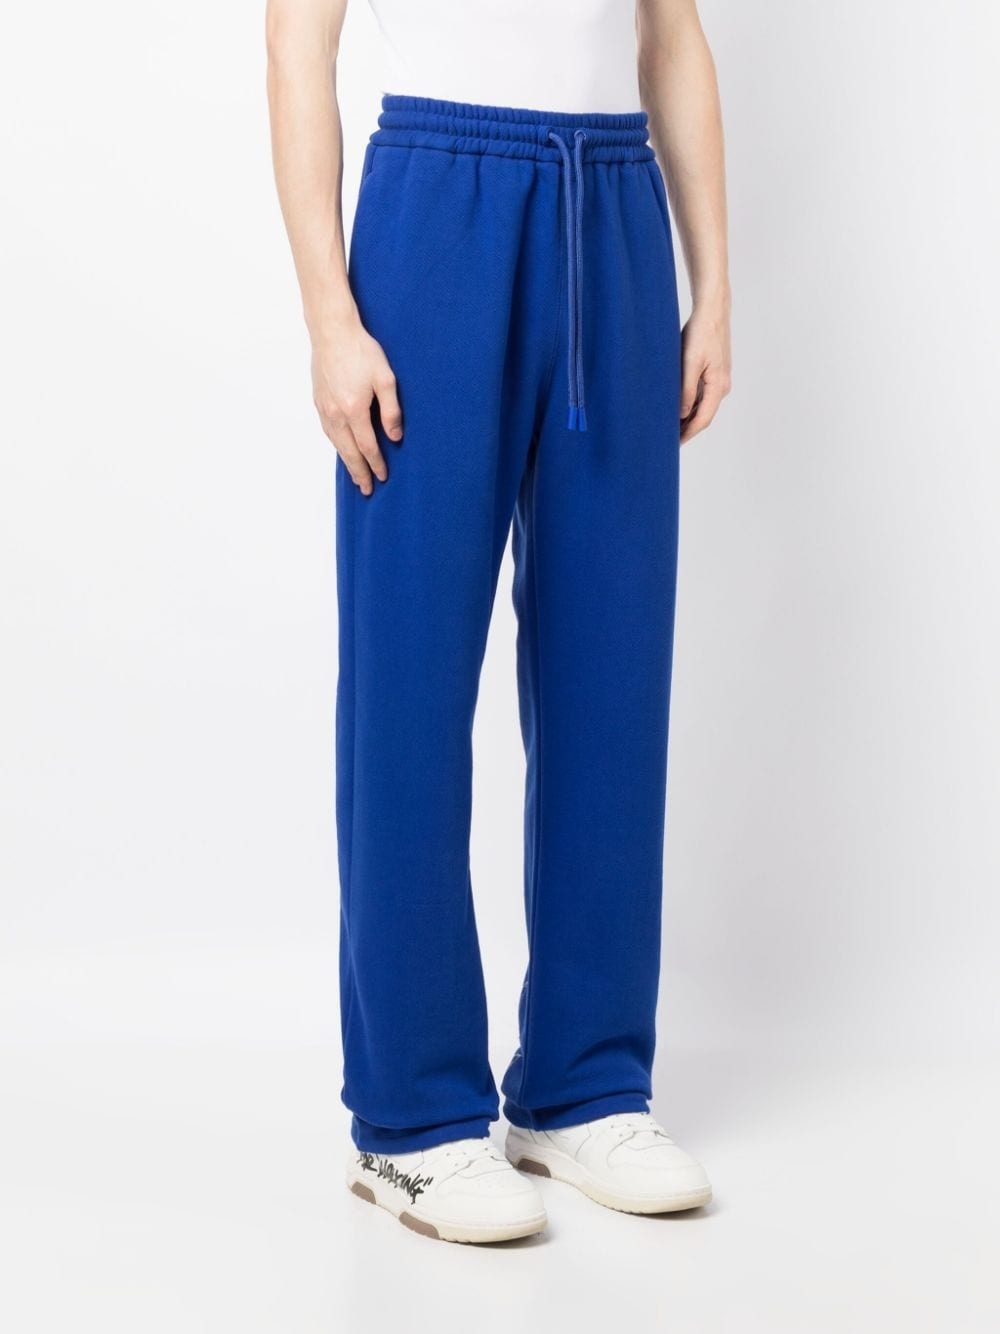 Diag-Stripe embroidered track pants - 3